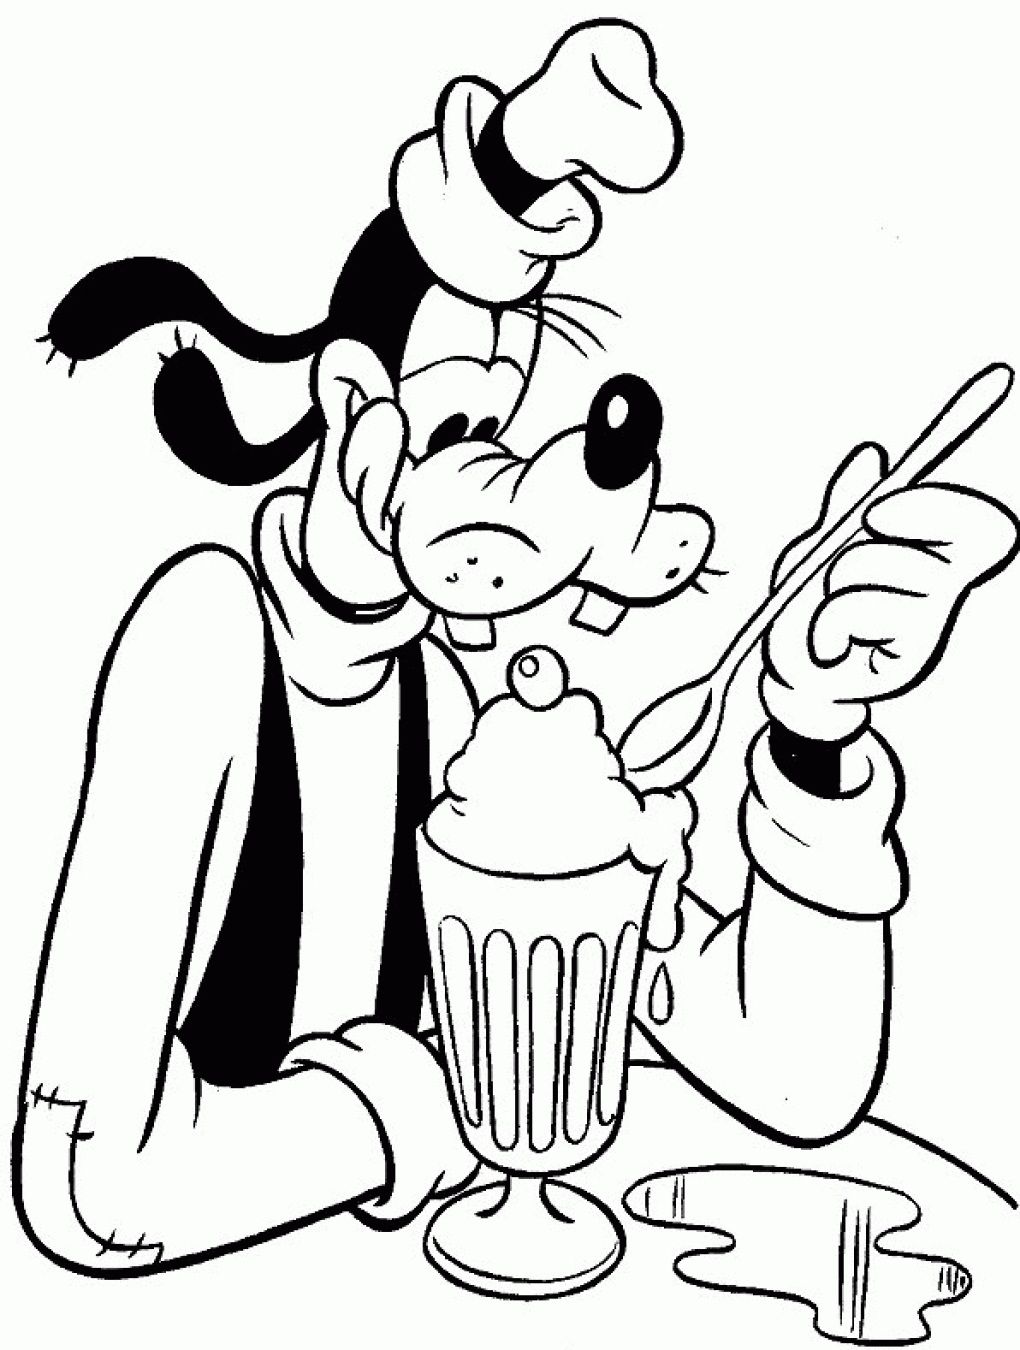 Goofy Coloring Pages and Book | Unique Coloring Pages